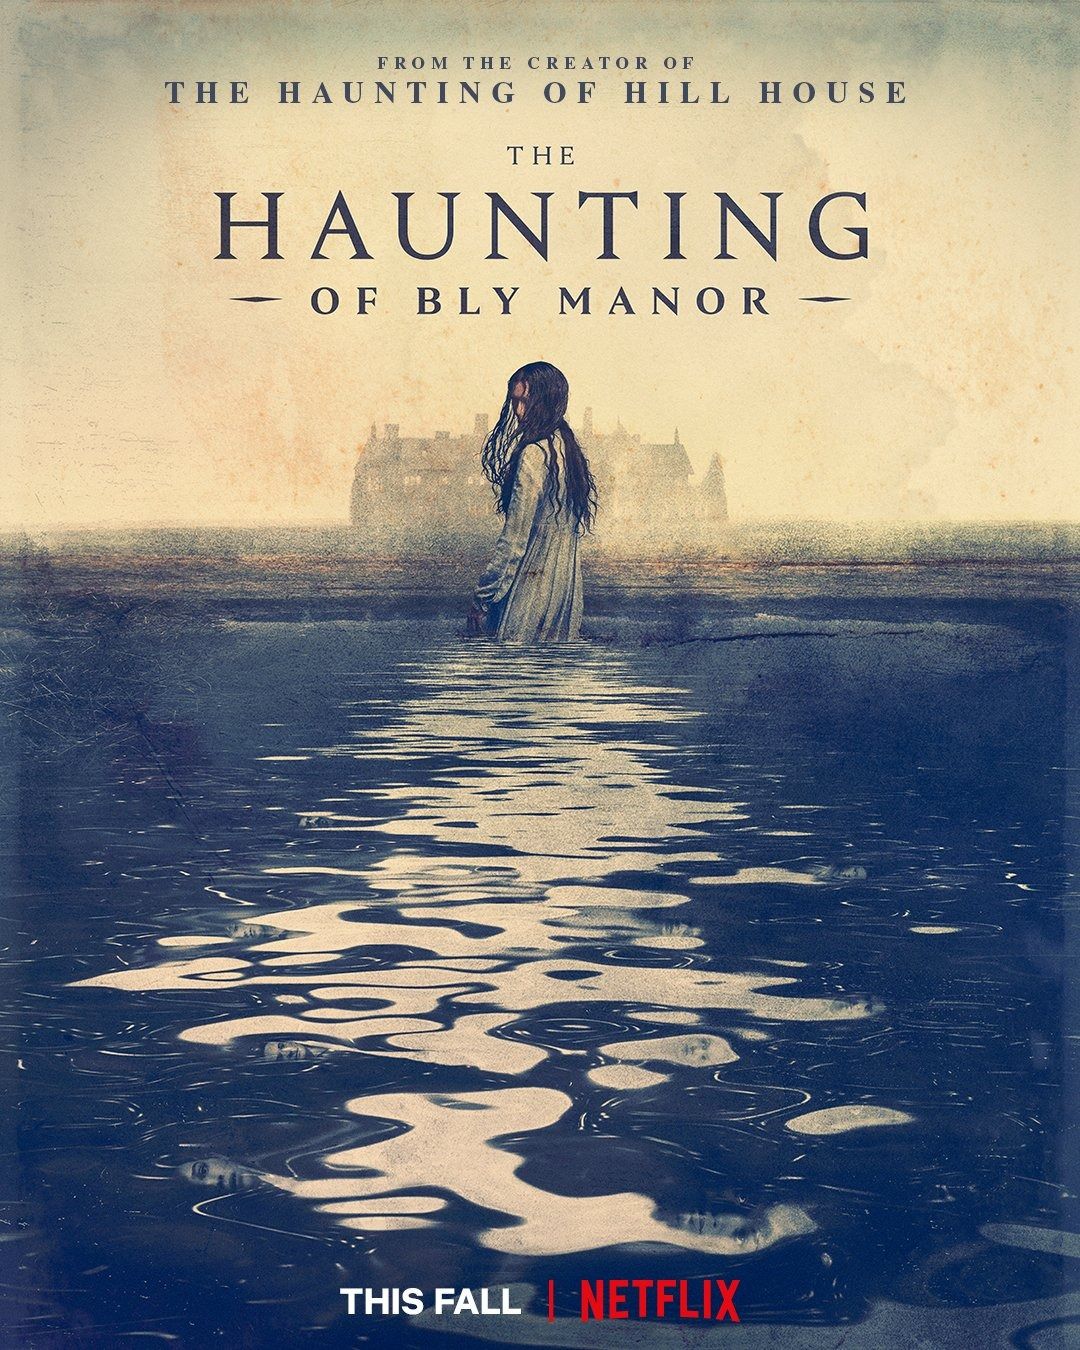 The Haunting of Bly Manor Netflix Poster